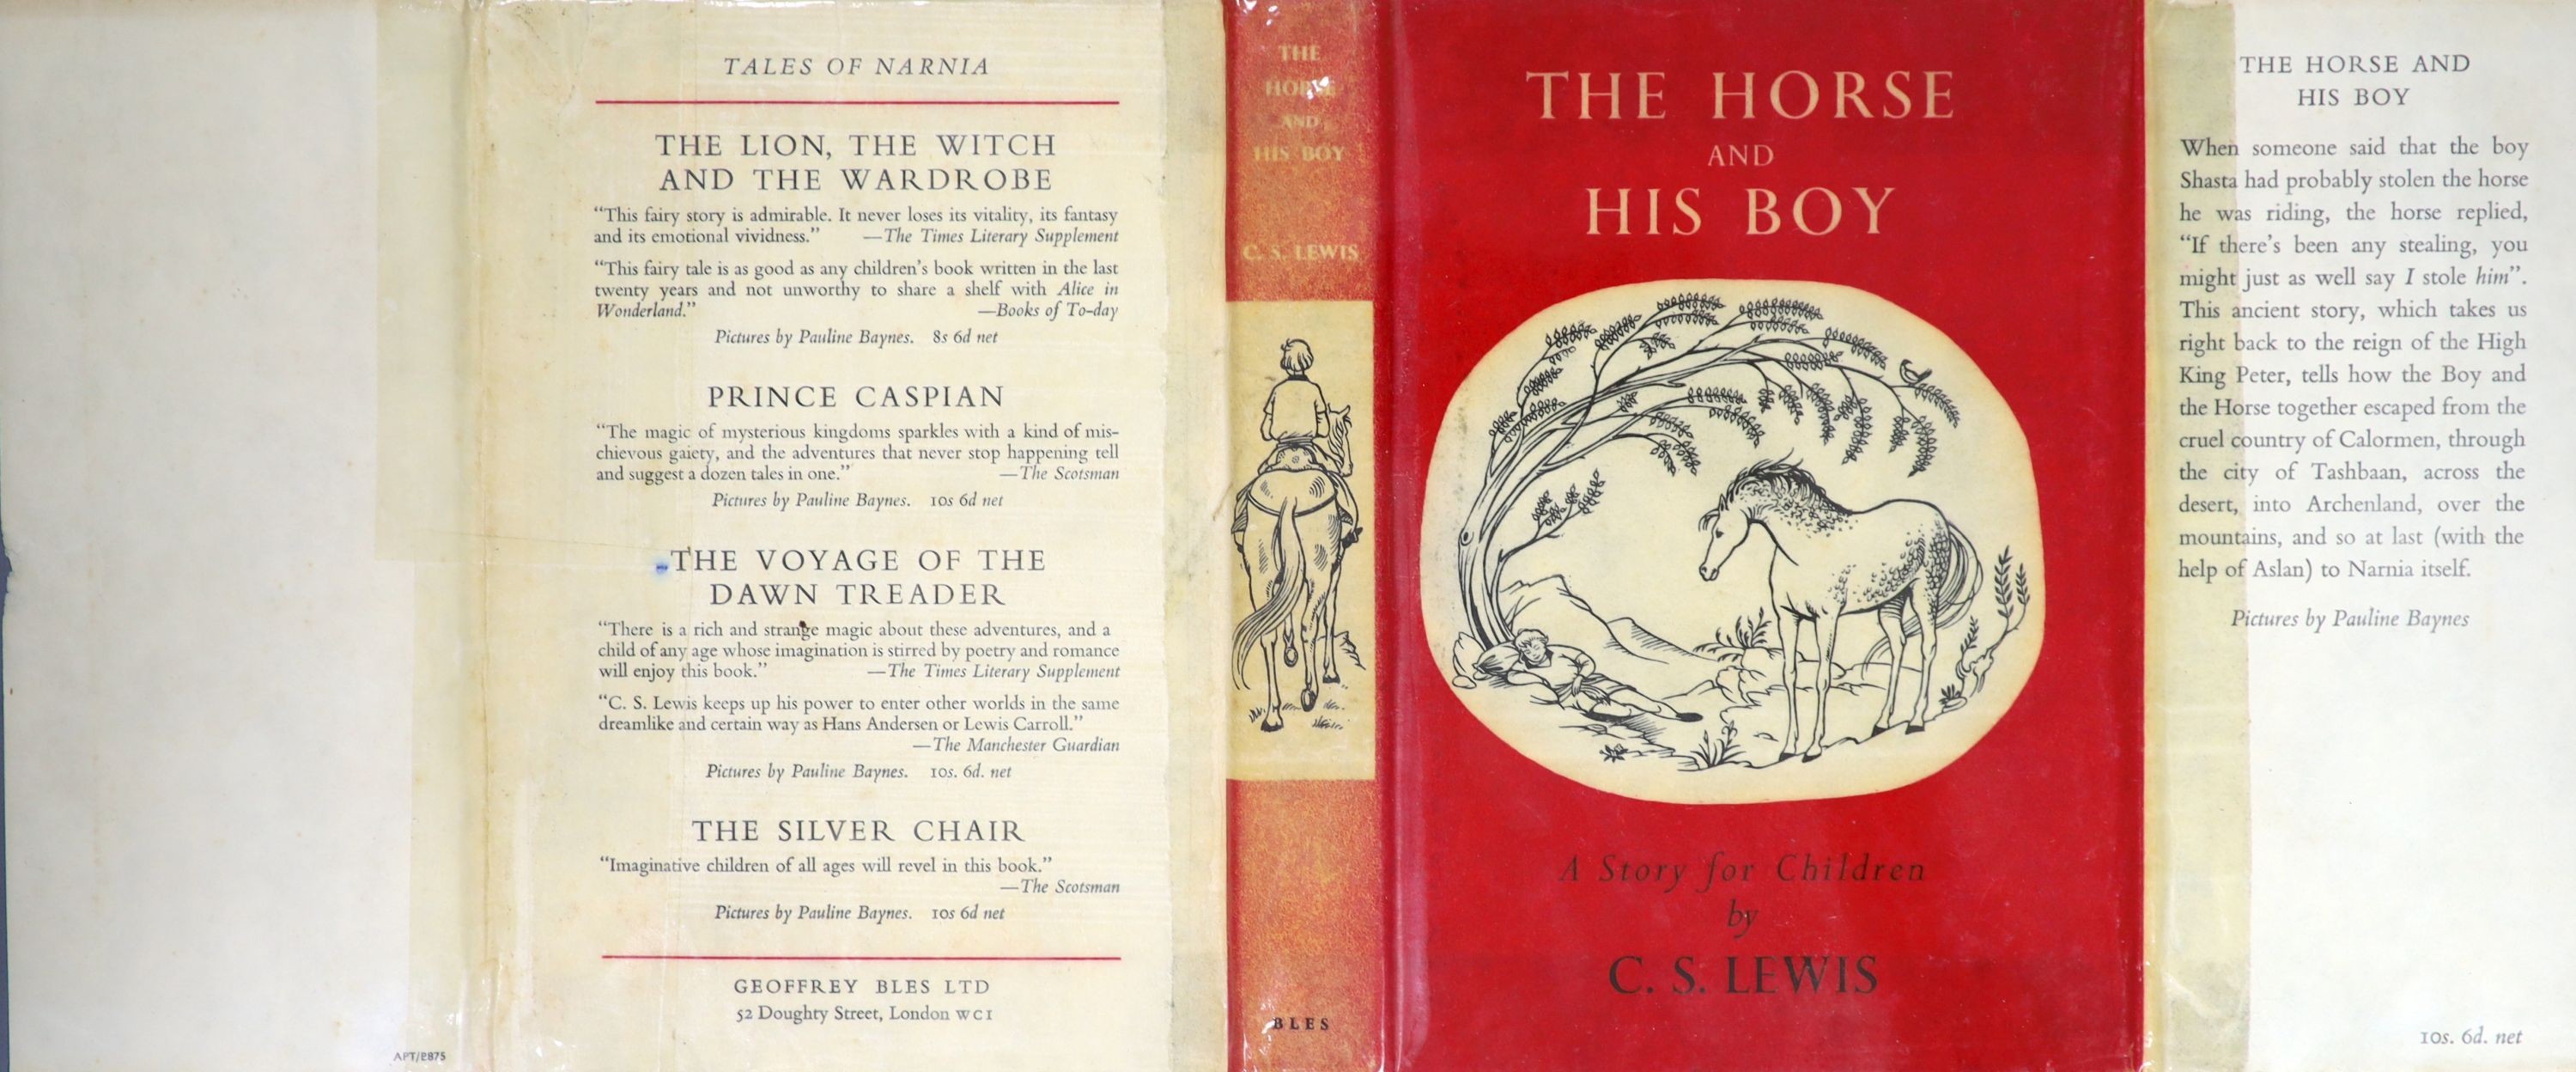 Lewis, Clive Staples - The Horse and His Boy, 1st edition, 8vo, illustrated by Pauline Baynes, frontis plate detached, but present, original cloth, in unclipped d/j, Geoffrey Bles, London, 1954